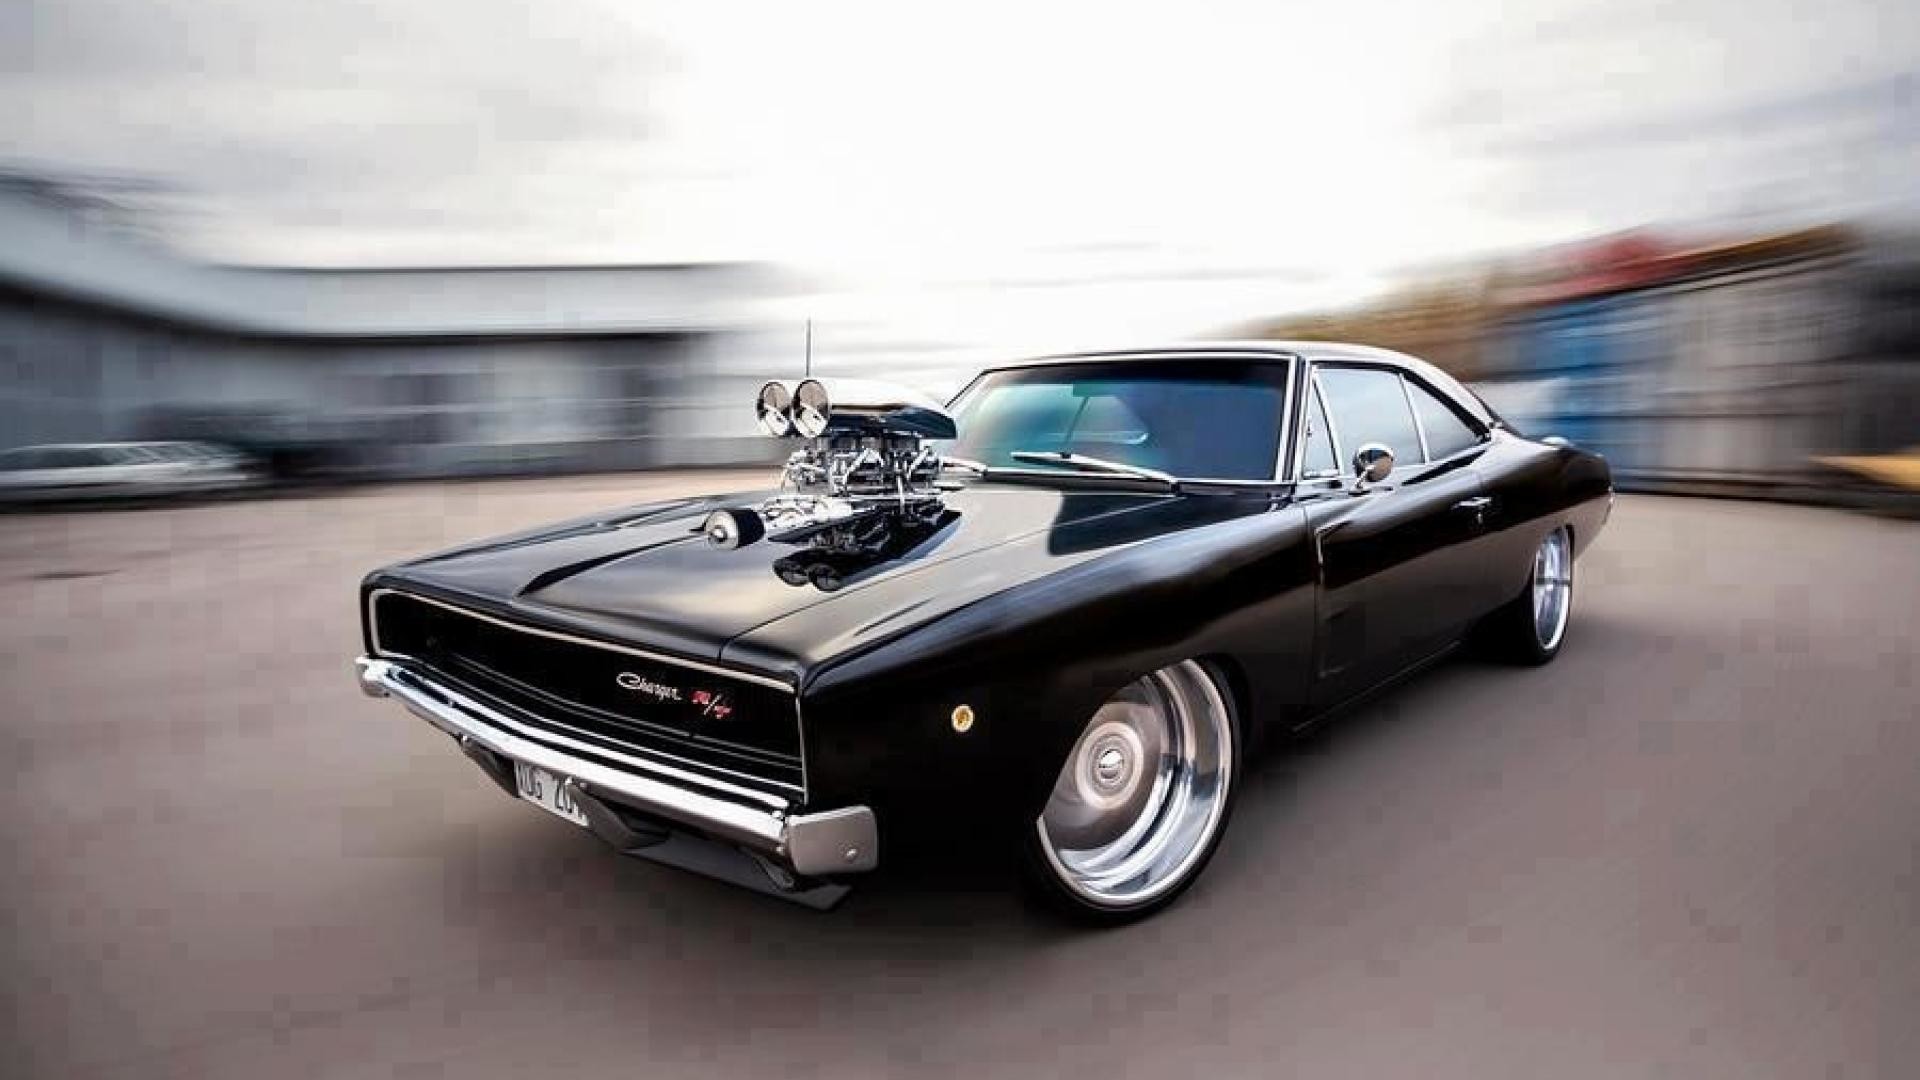 Dodge Charger Wallpaper The Best Image In